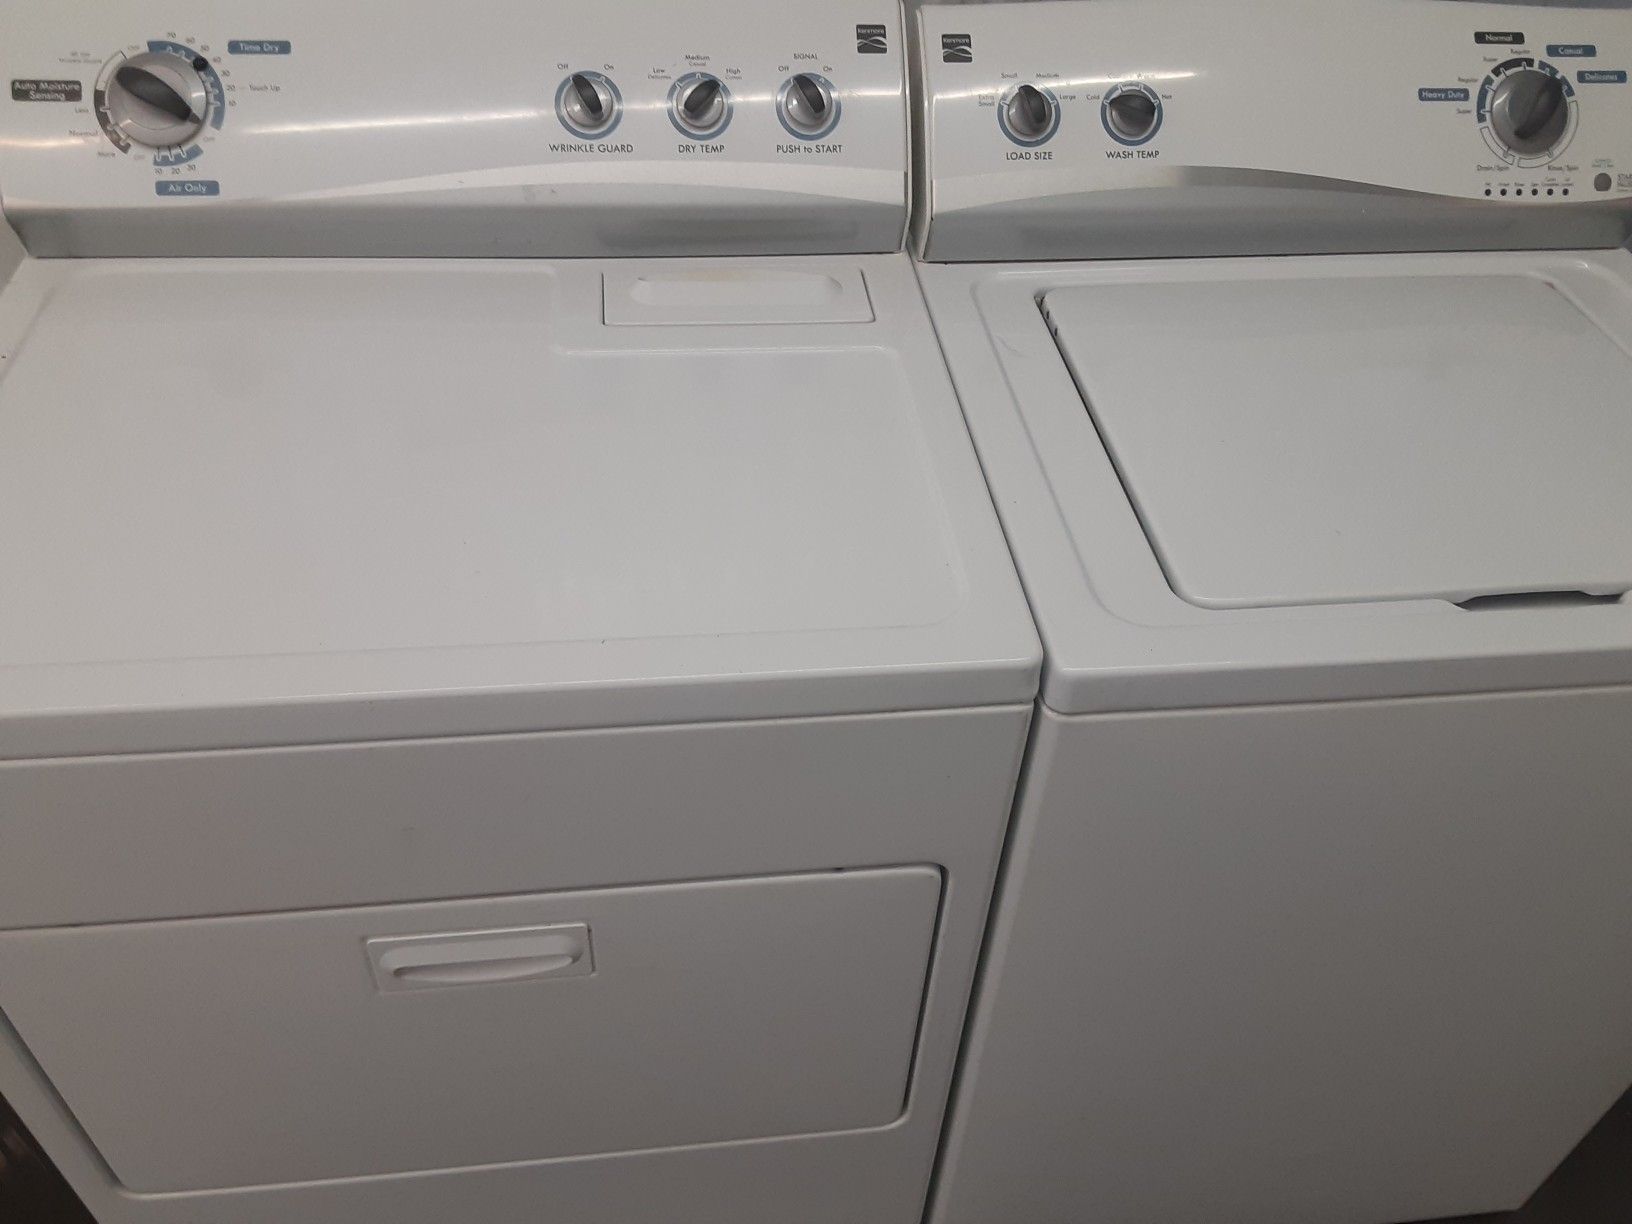 BEAUTIFUL LIKE NEW 2 YEAR OLD KENMORE WASHER AND DRYER LARGEST MADE